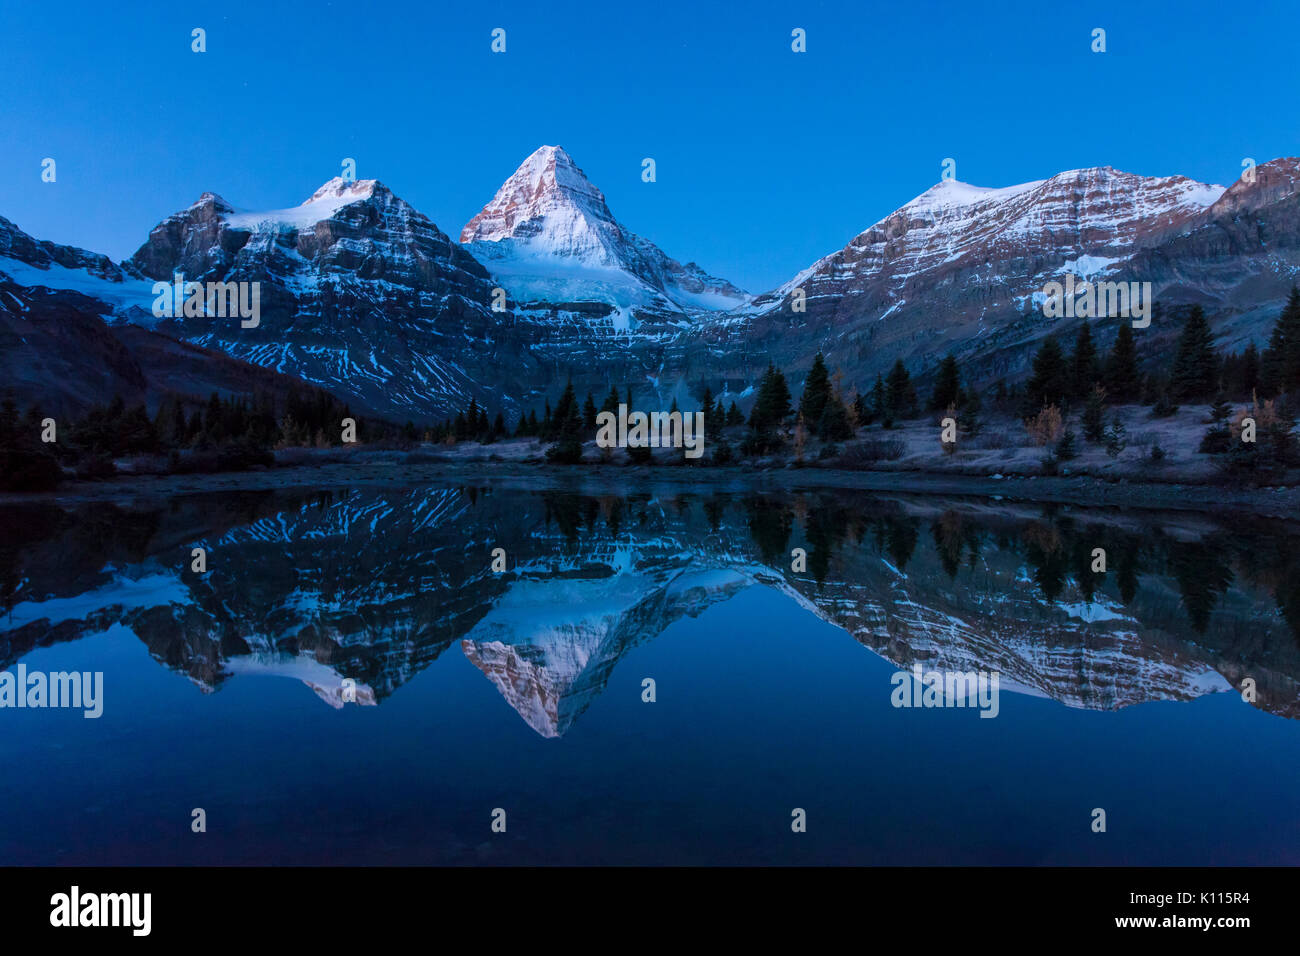 Mount Assiniboine and a star-filled sky reflected in a tarn near Lake Magog, Mount Assiniboine Provincial Park, Rocky Mountains, British Columbia, Can Stock Photo